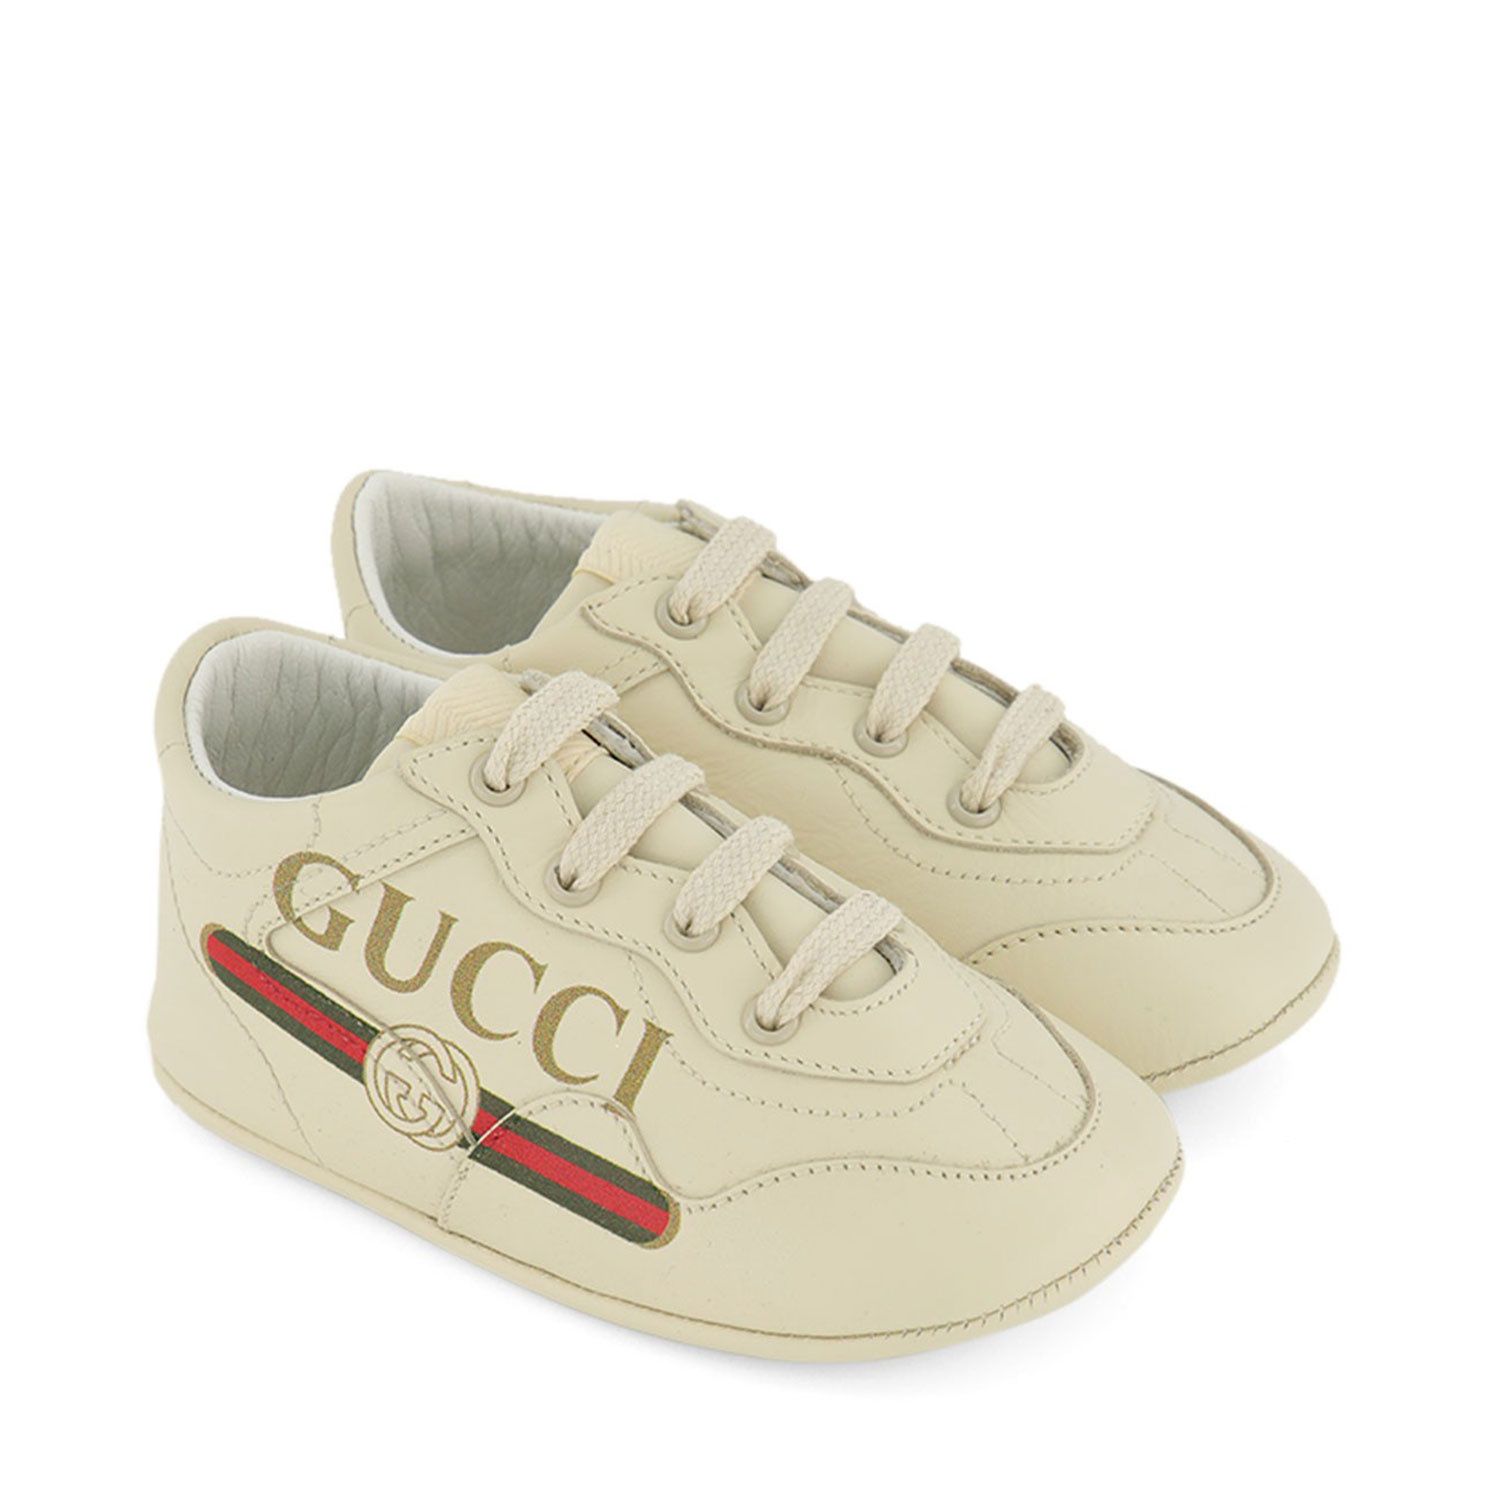 gucci baby shoes